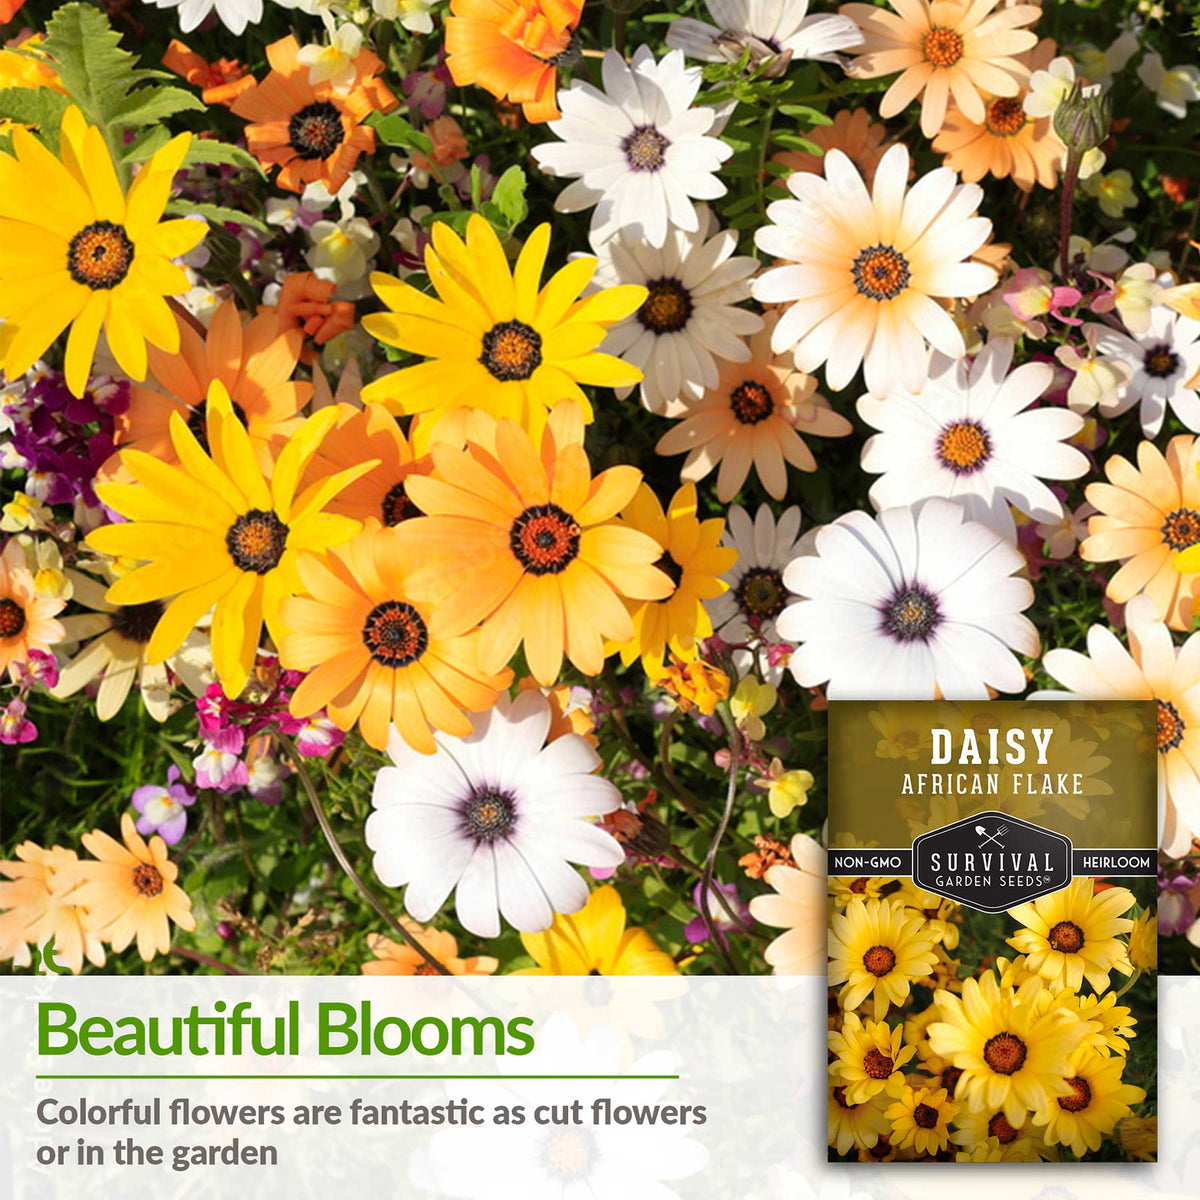 beautiful blooms, daisies are great cut flowers